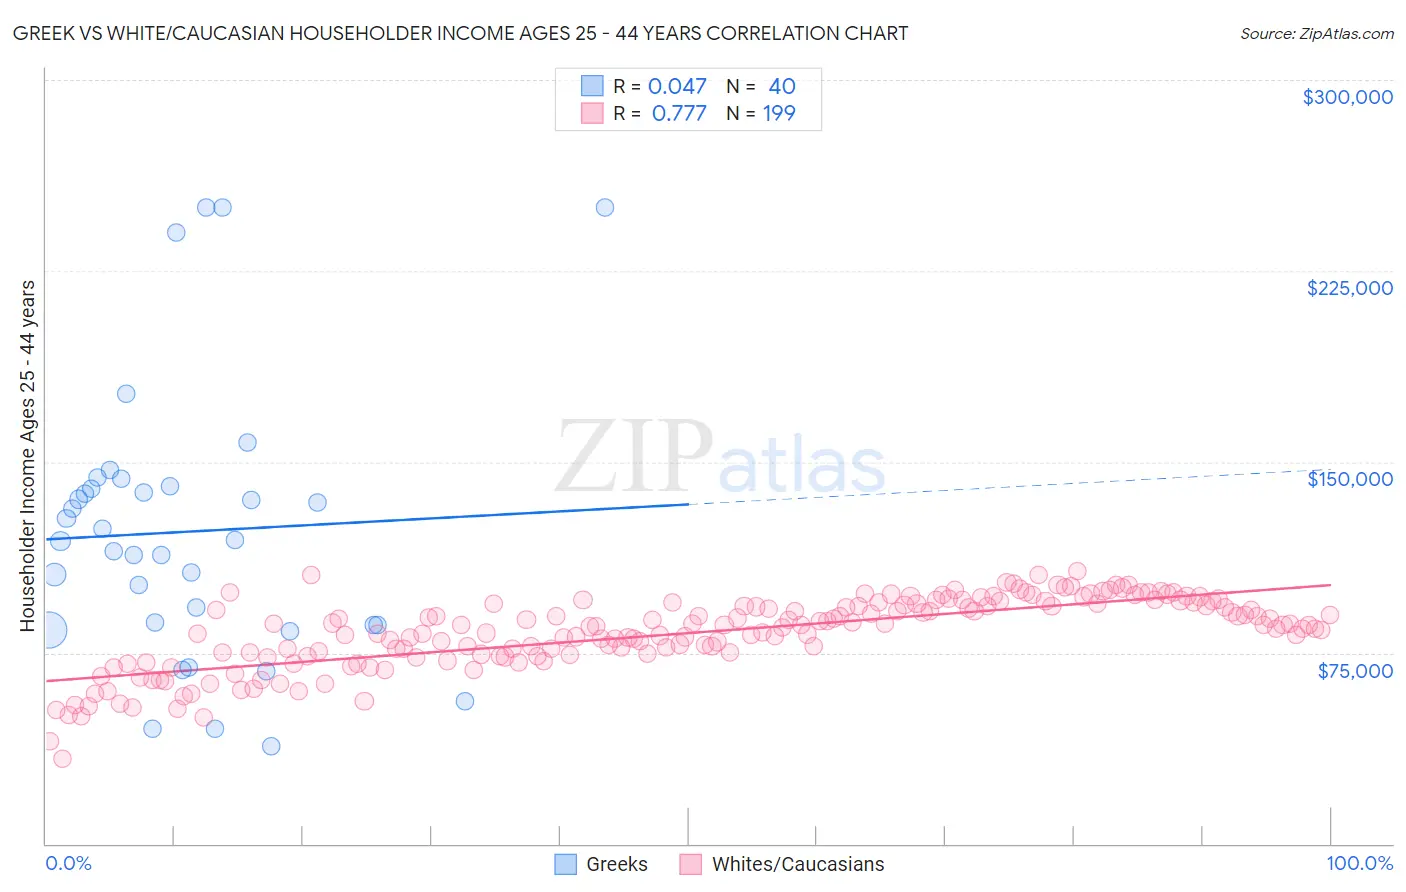 Greek vs White/Caucasian Householder Income Ages 25 - 44 years